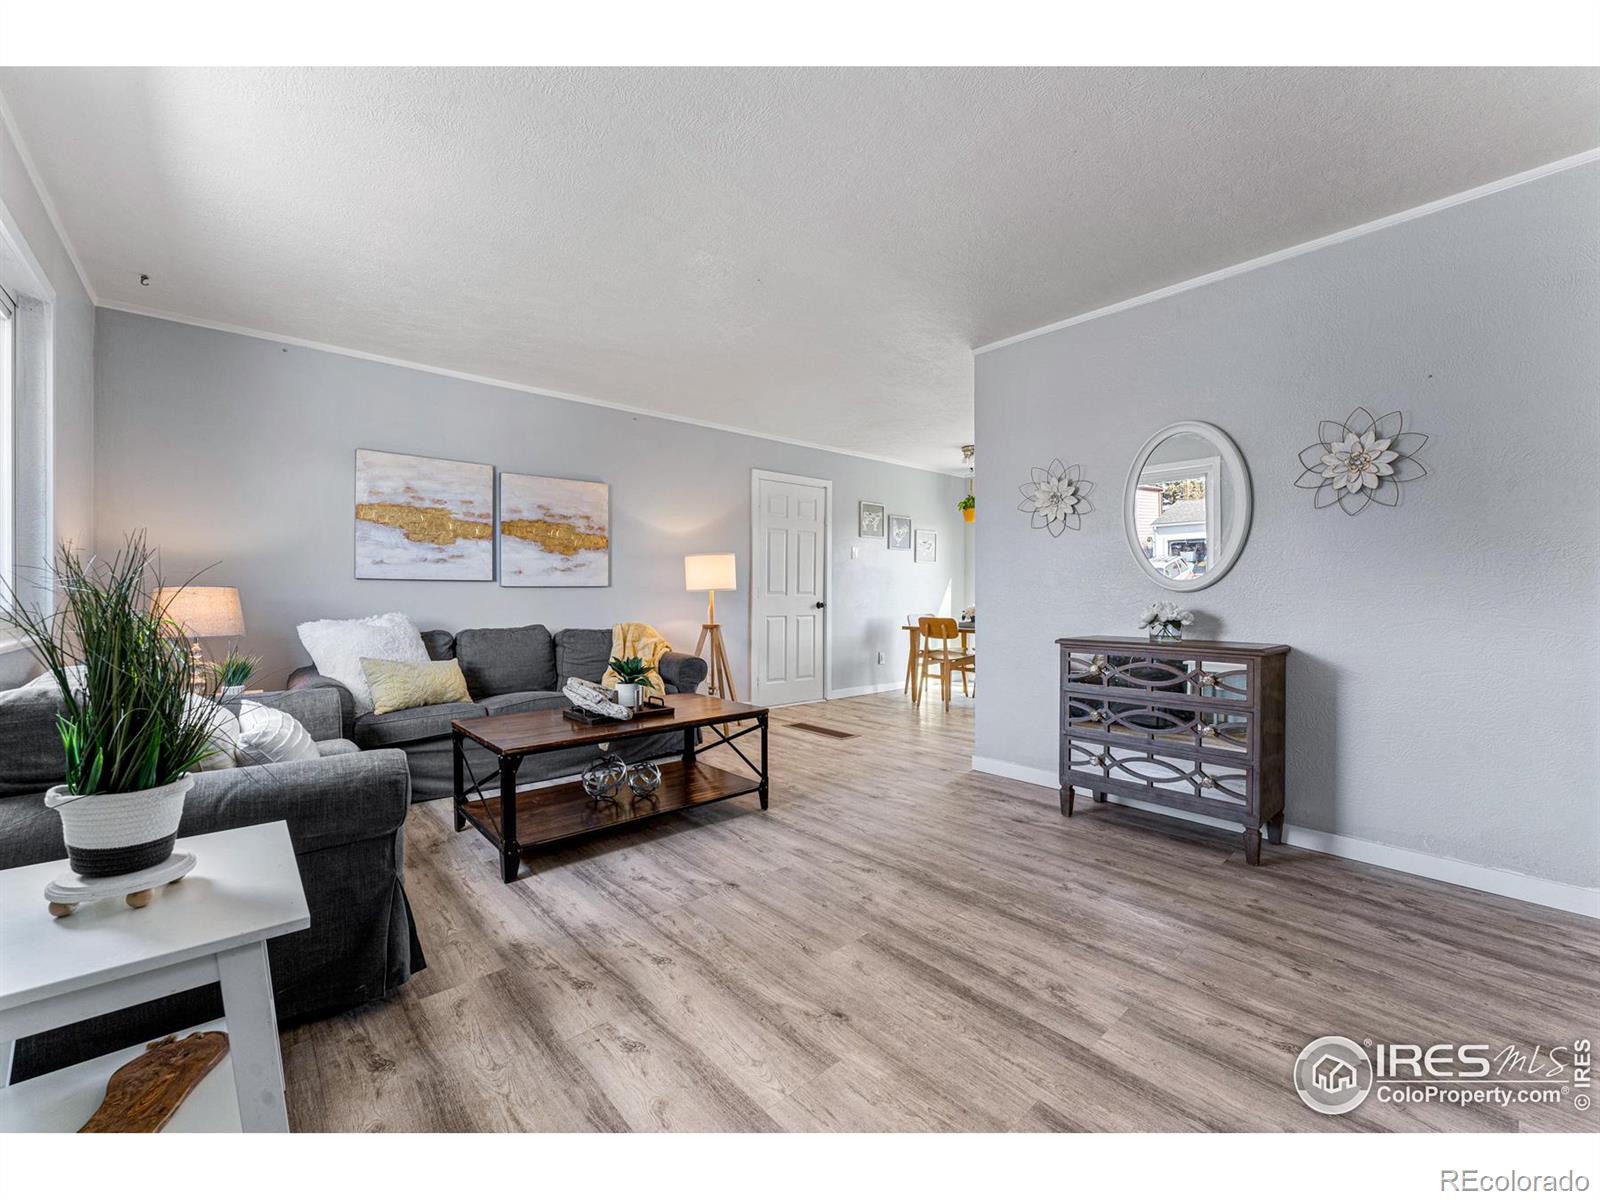 Report Image for 10742  Moore Way,Westminster, Colorado